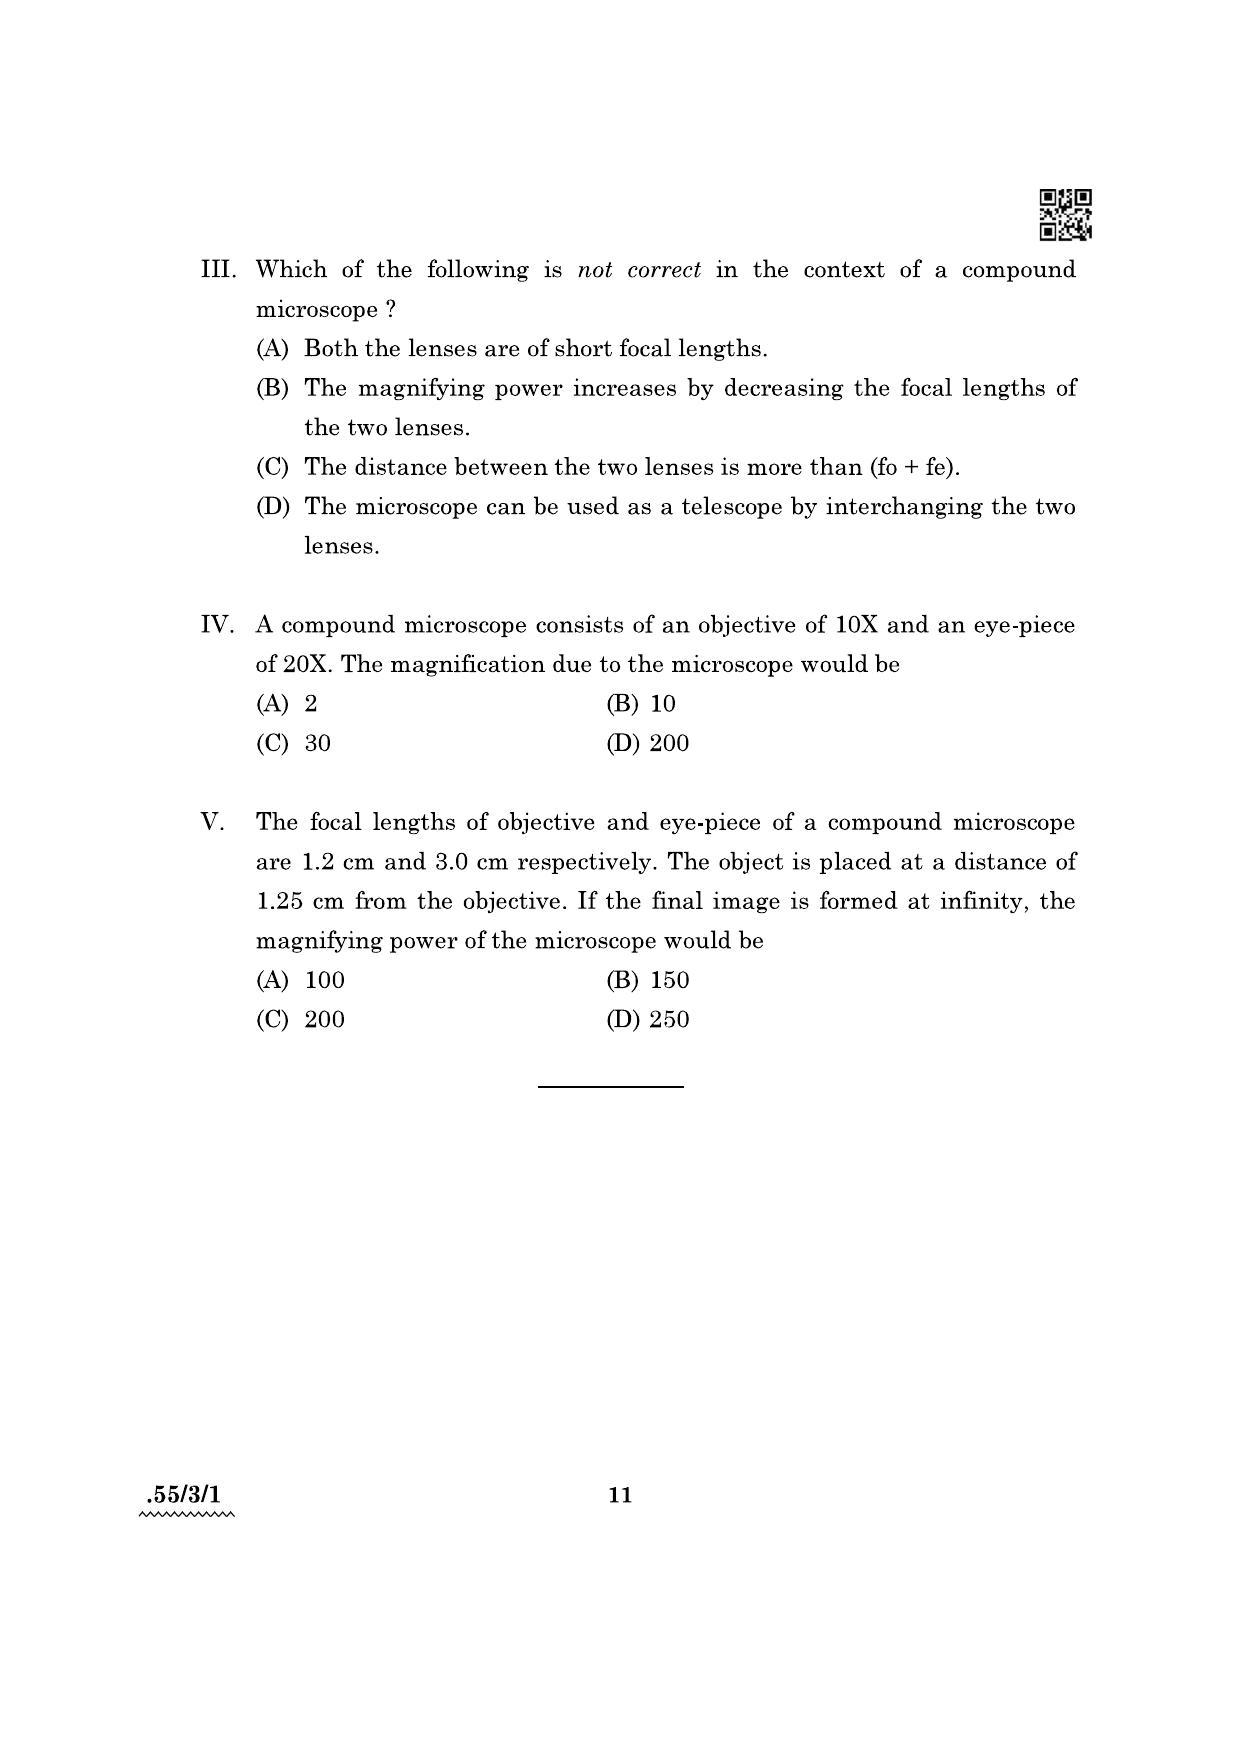 CBSE Class 12 55-3-1 Physics 2022 Question Paper - Page 11